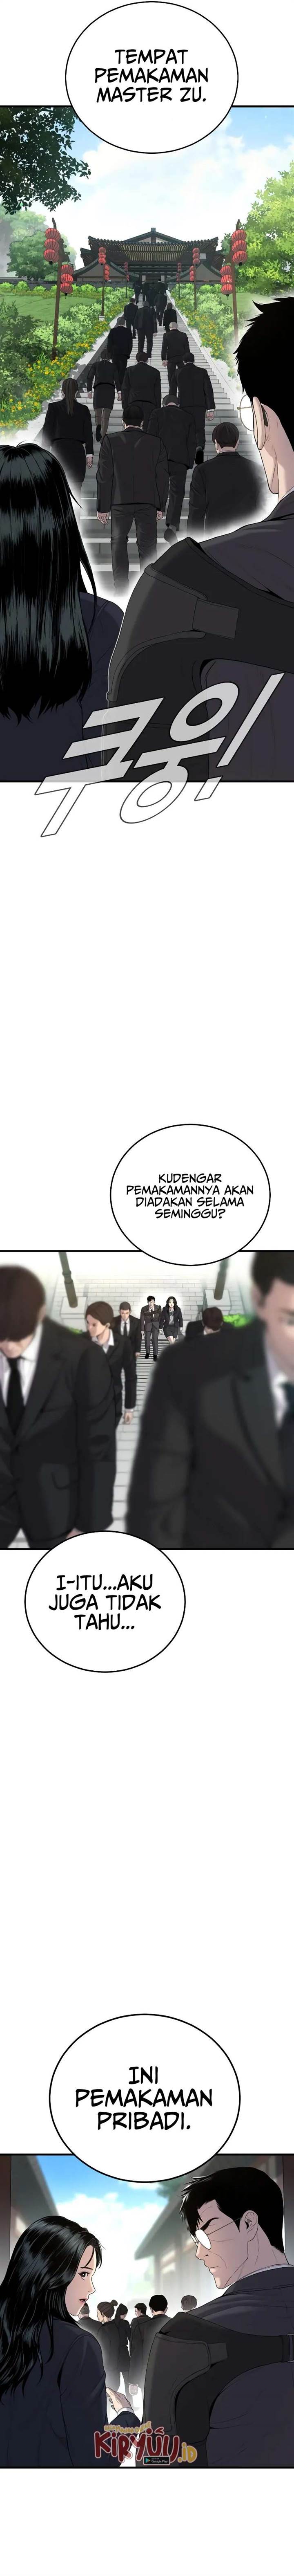 Manager Kim Chapter 89